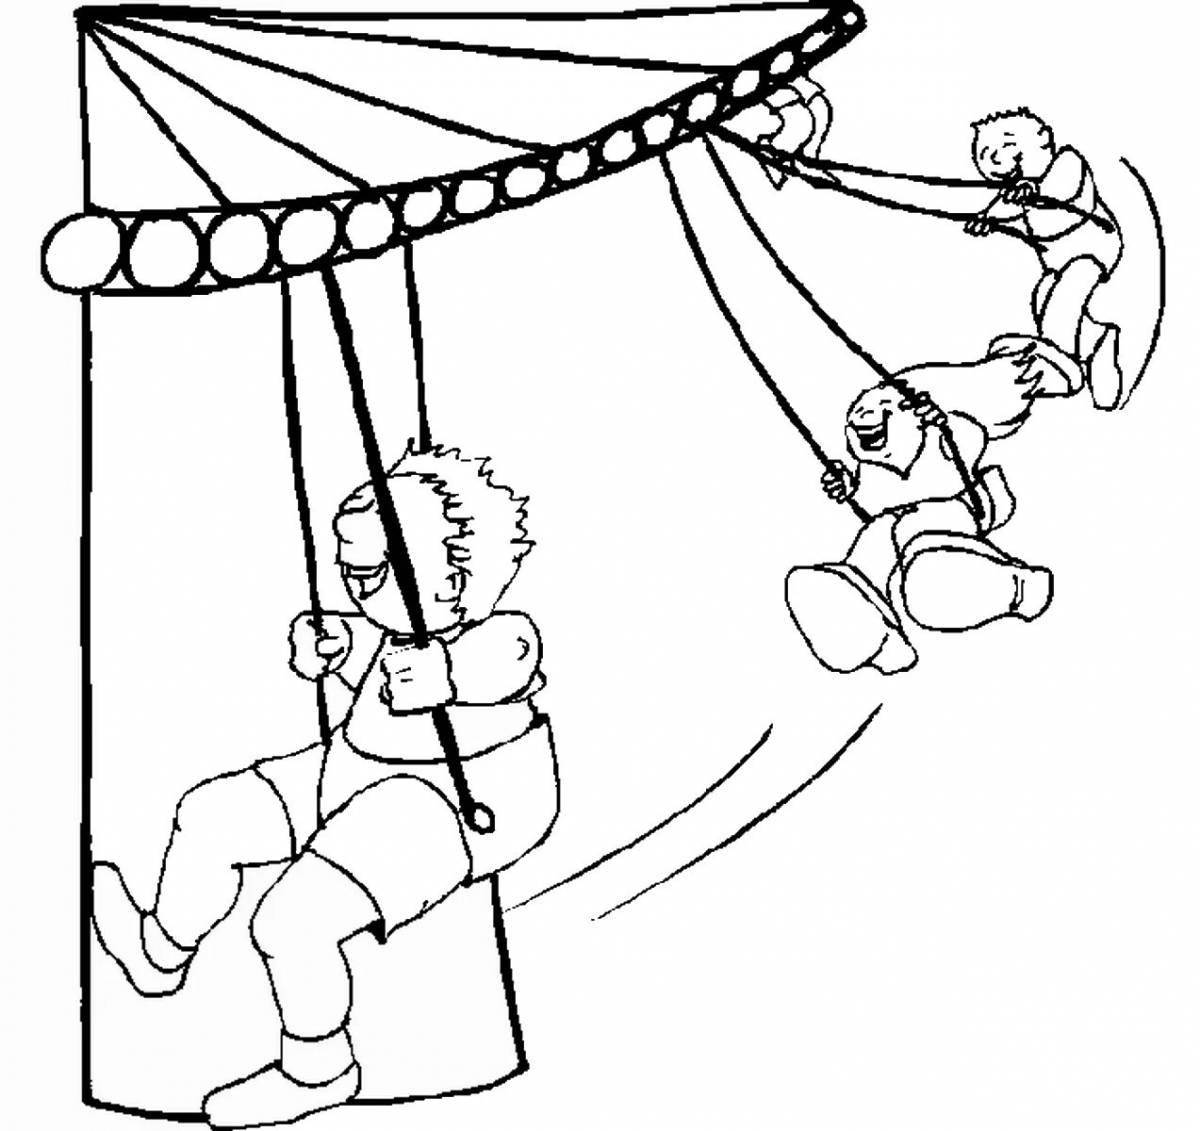 Great carousel coloring book for kids